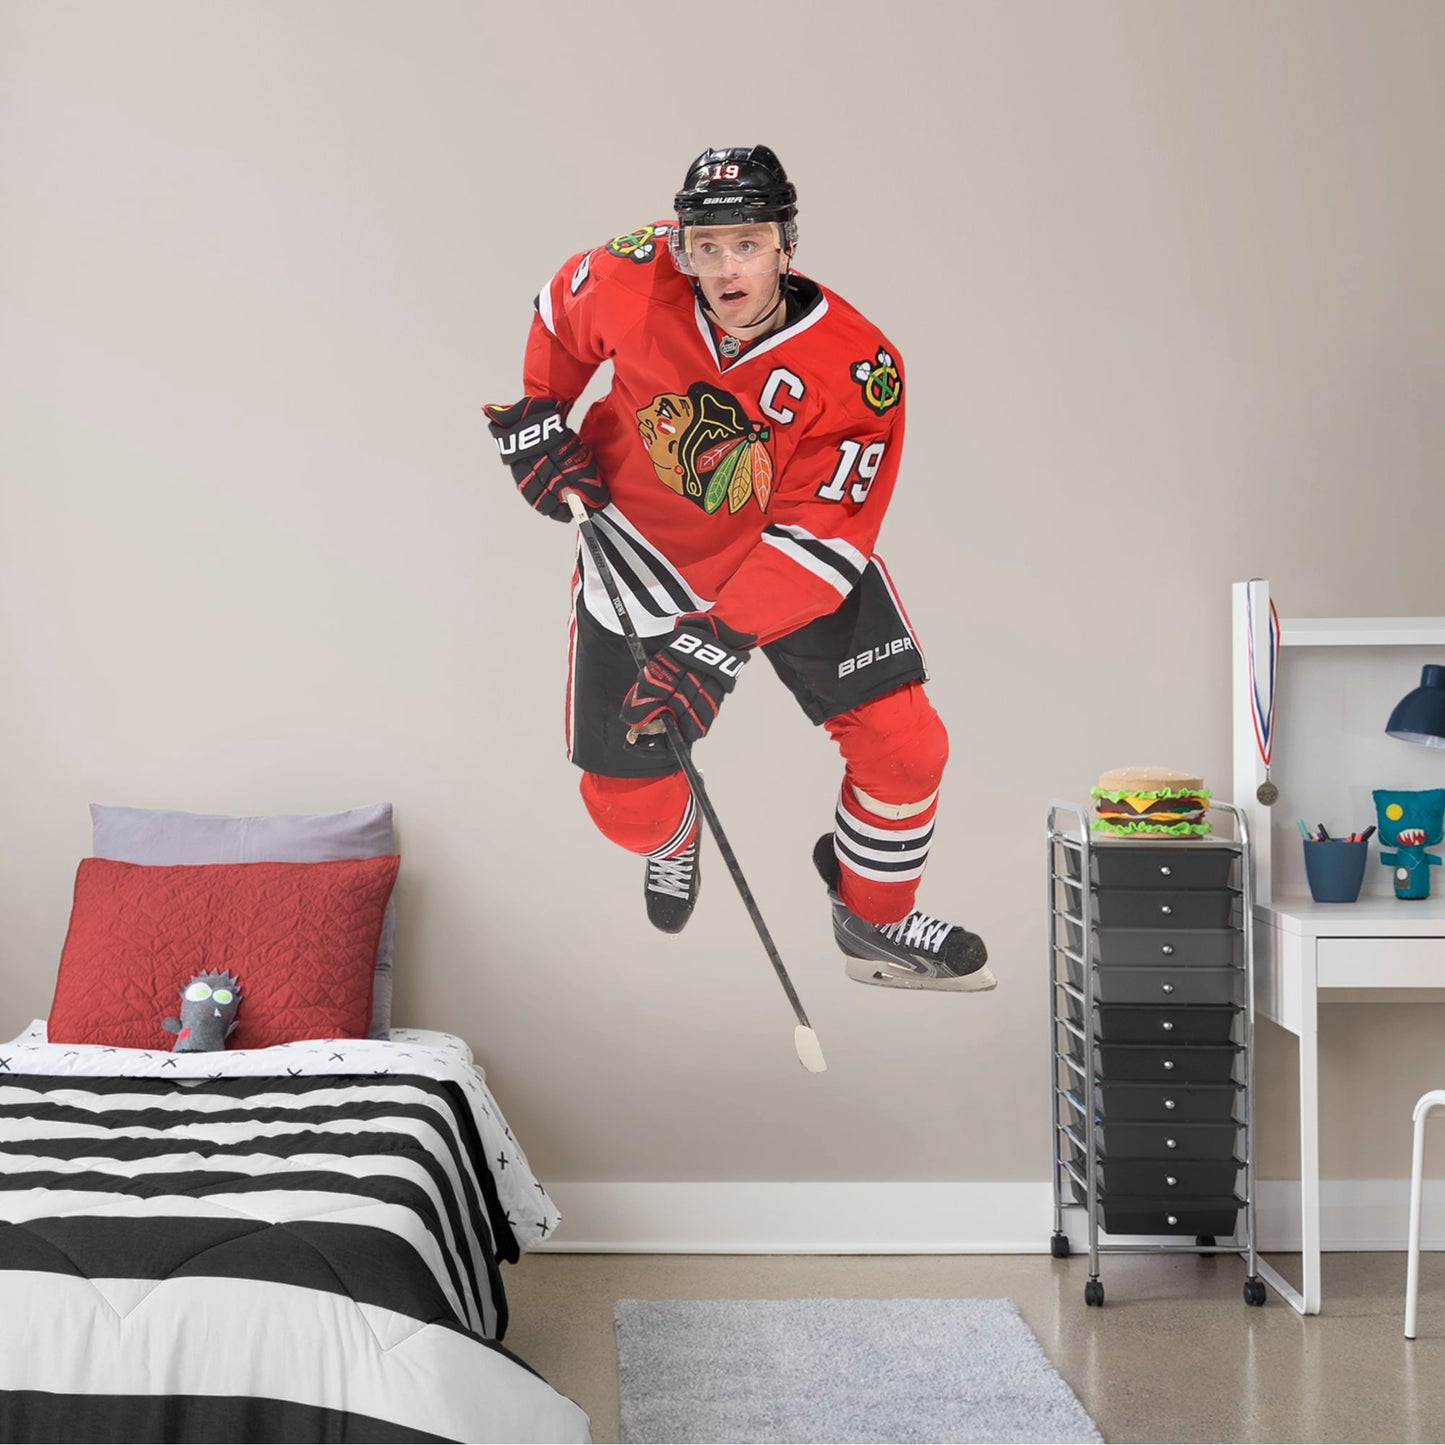 Patrick Kane Home Jersey Removable Wall Decal